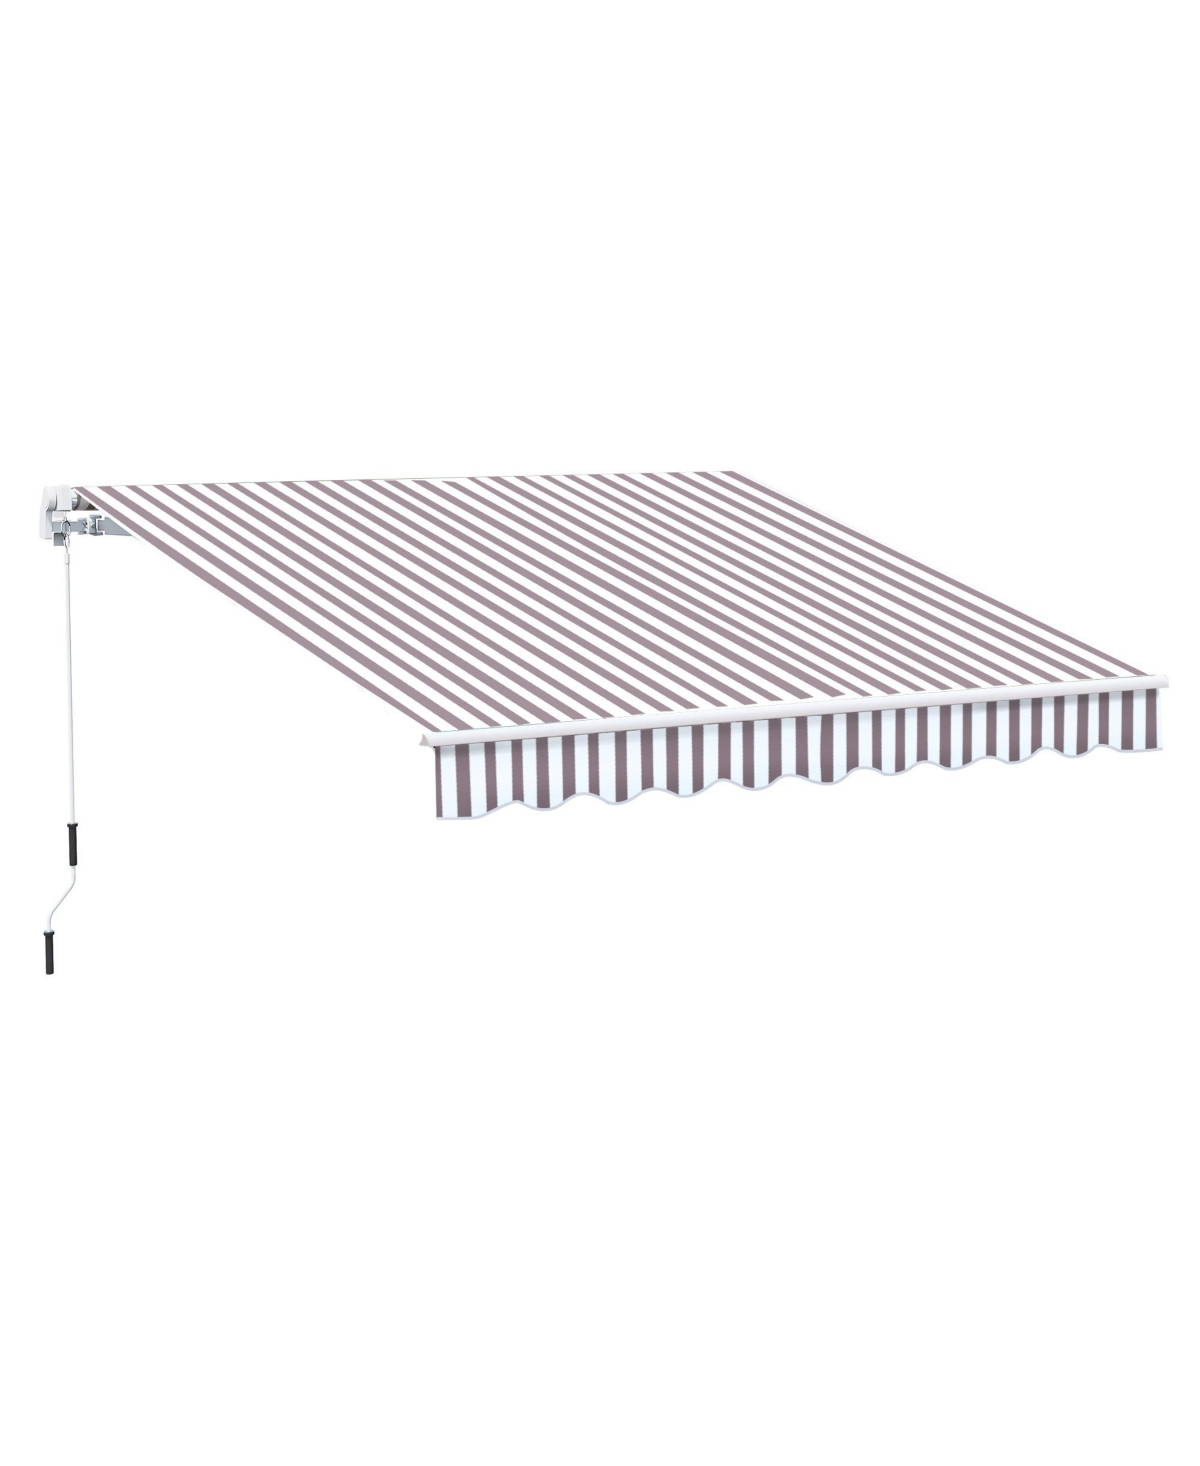 10' x 8' Manual Retractable Awning Sun Shade Shelter for Patio Deck Yard with Uv Protection and Easy Crank Opening, Brown Stripe - White/coff